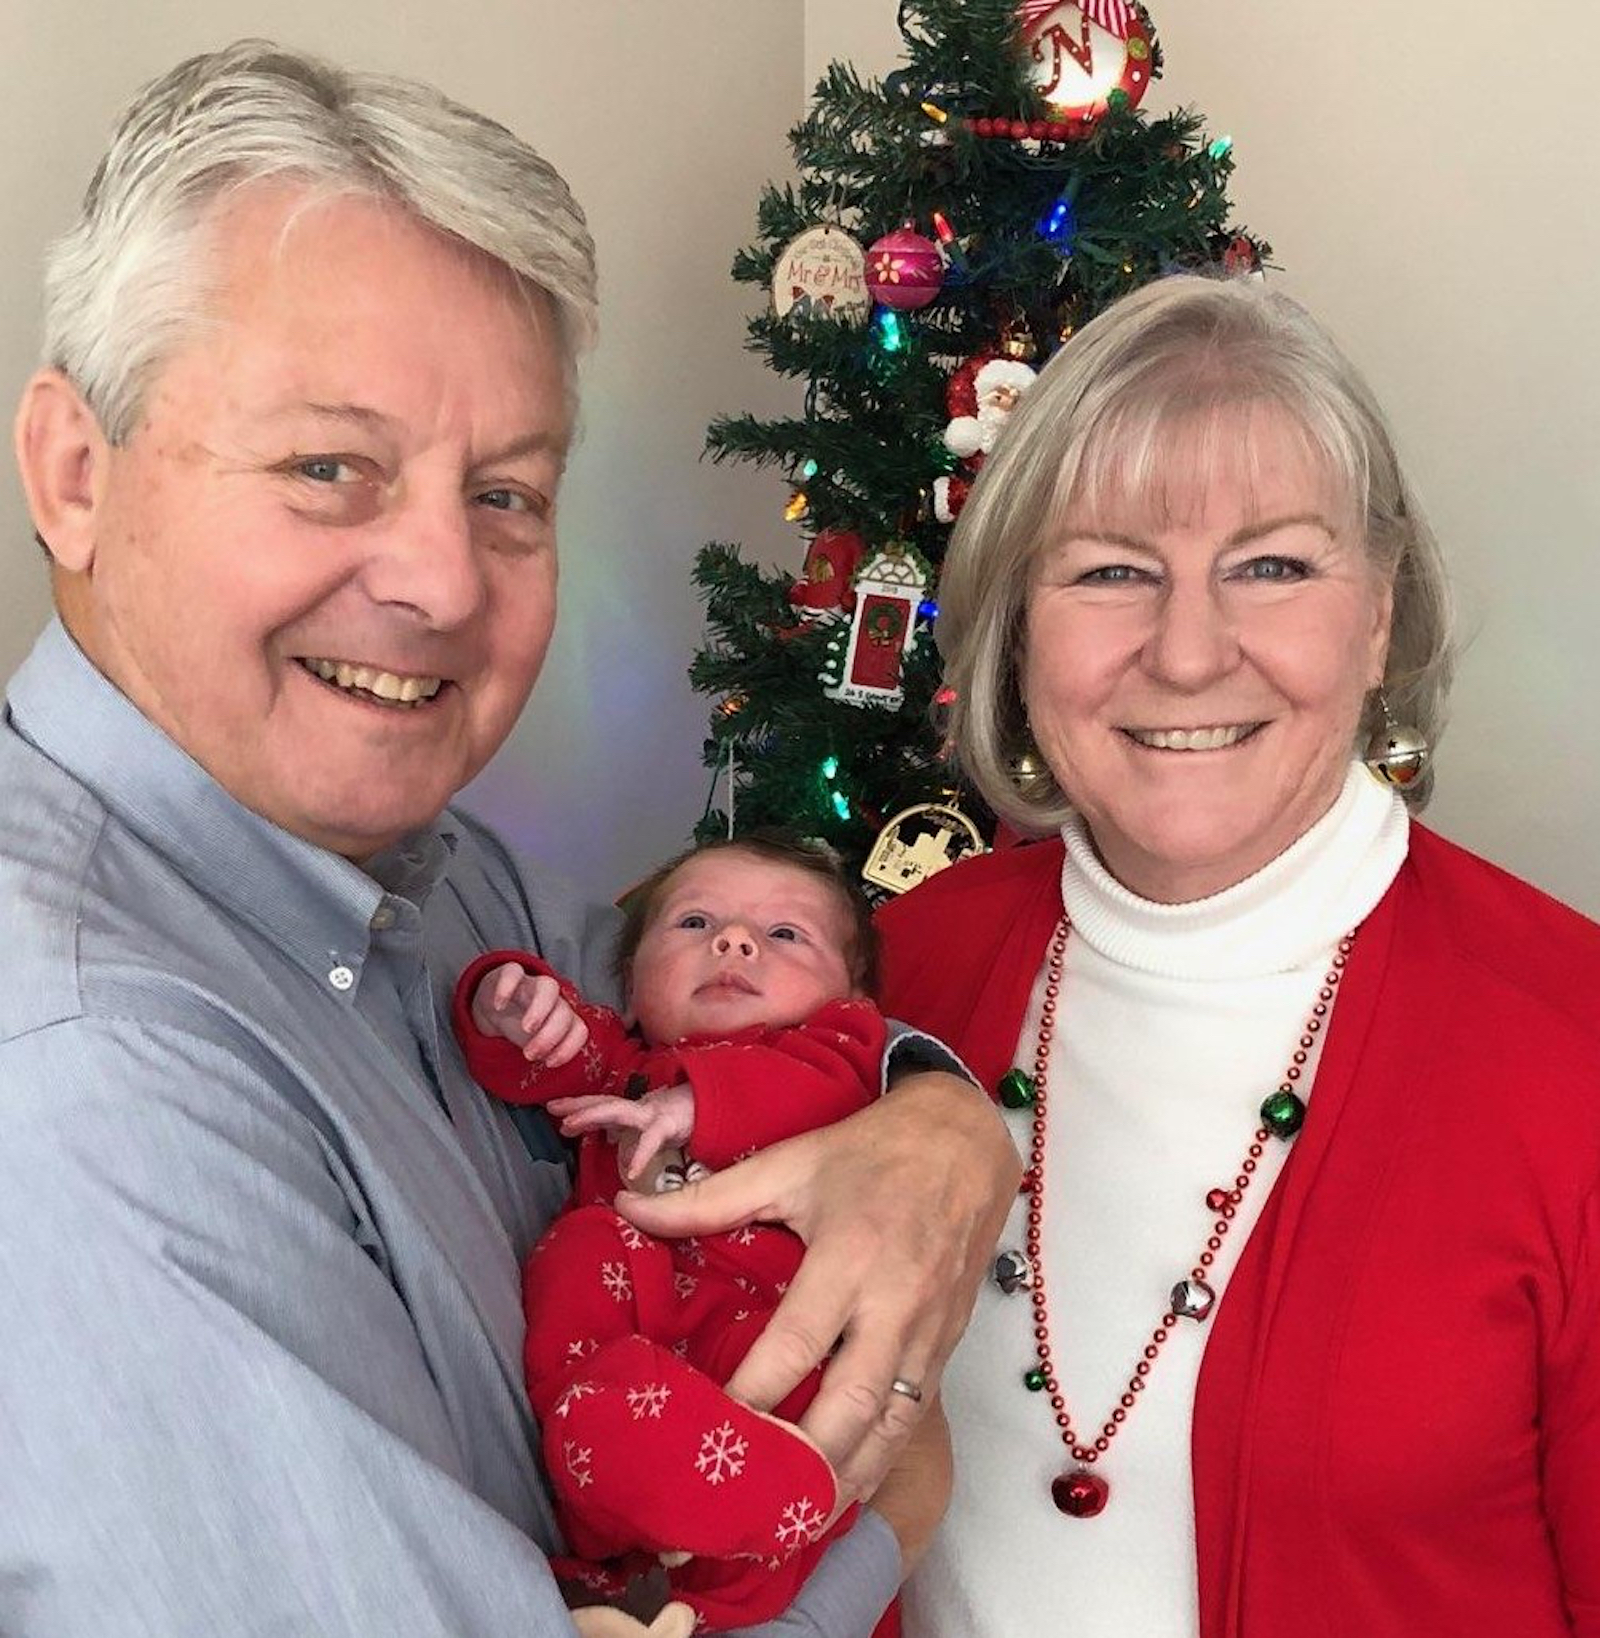 Bob and Carol Erker with their granddaughter, Penny, in 2019.